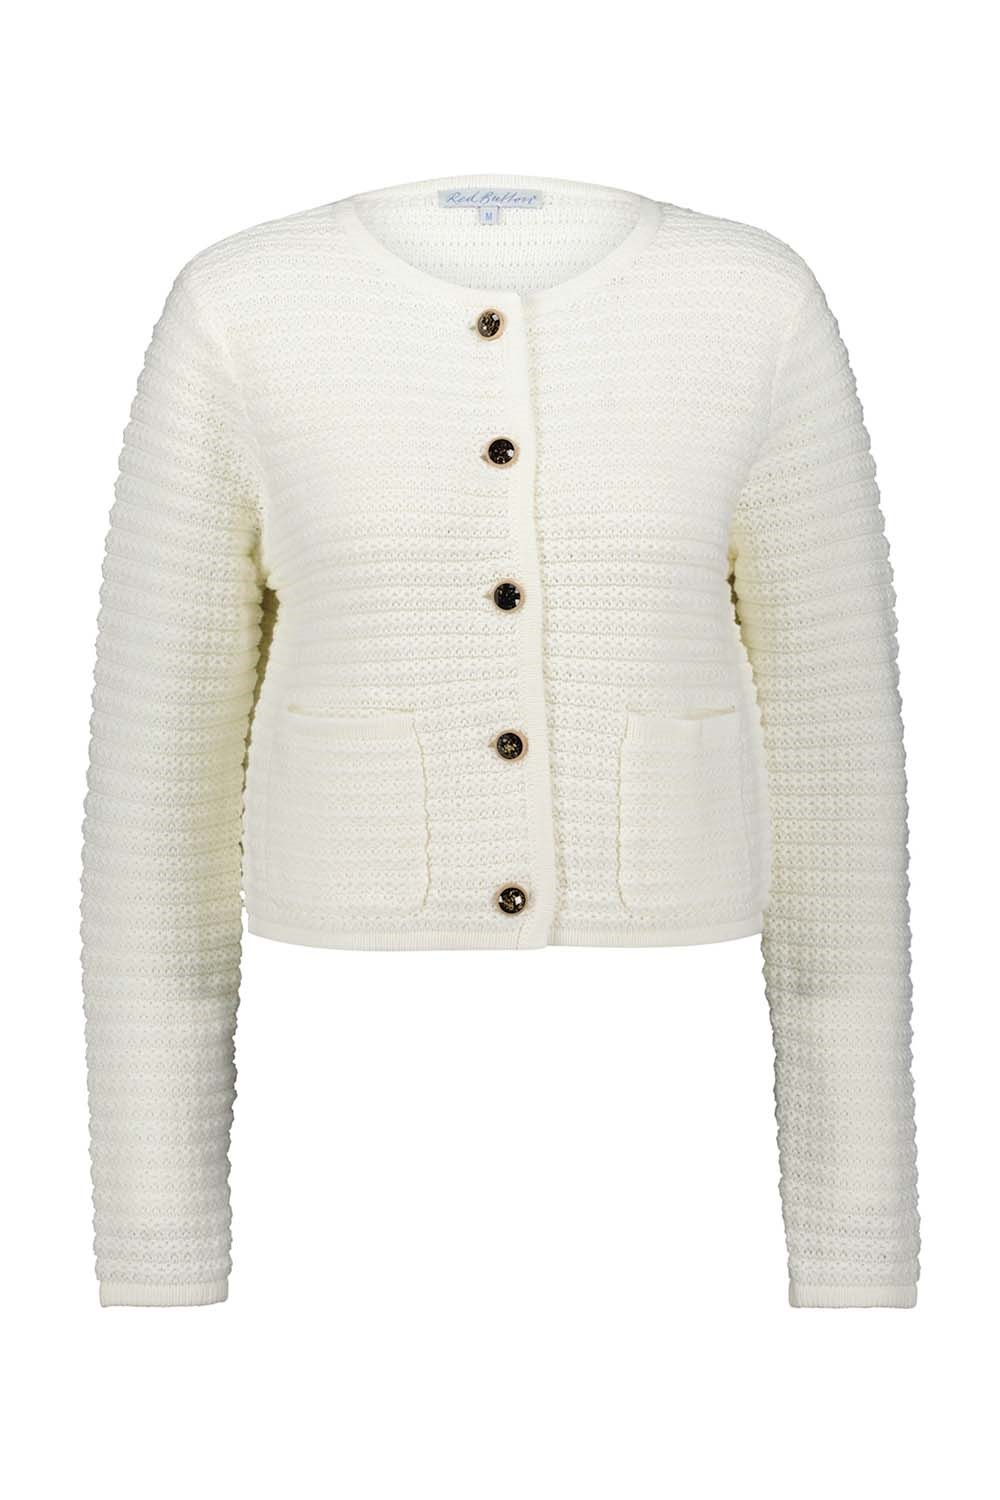 Chanel jacket Off White